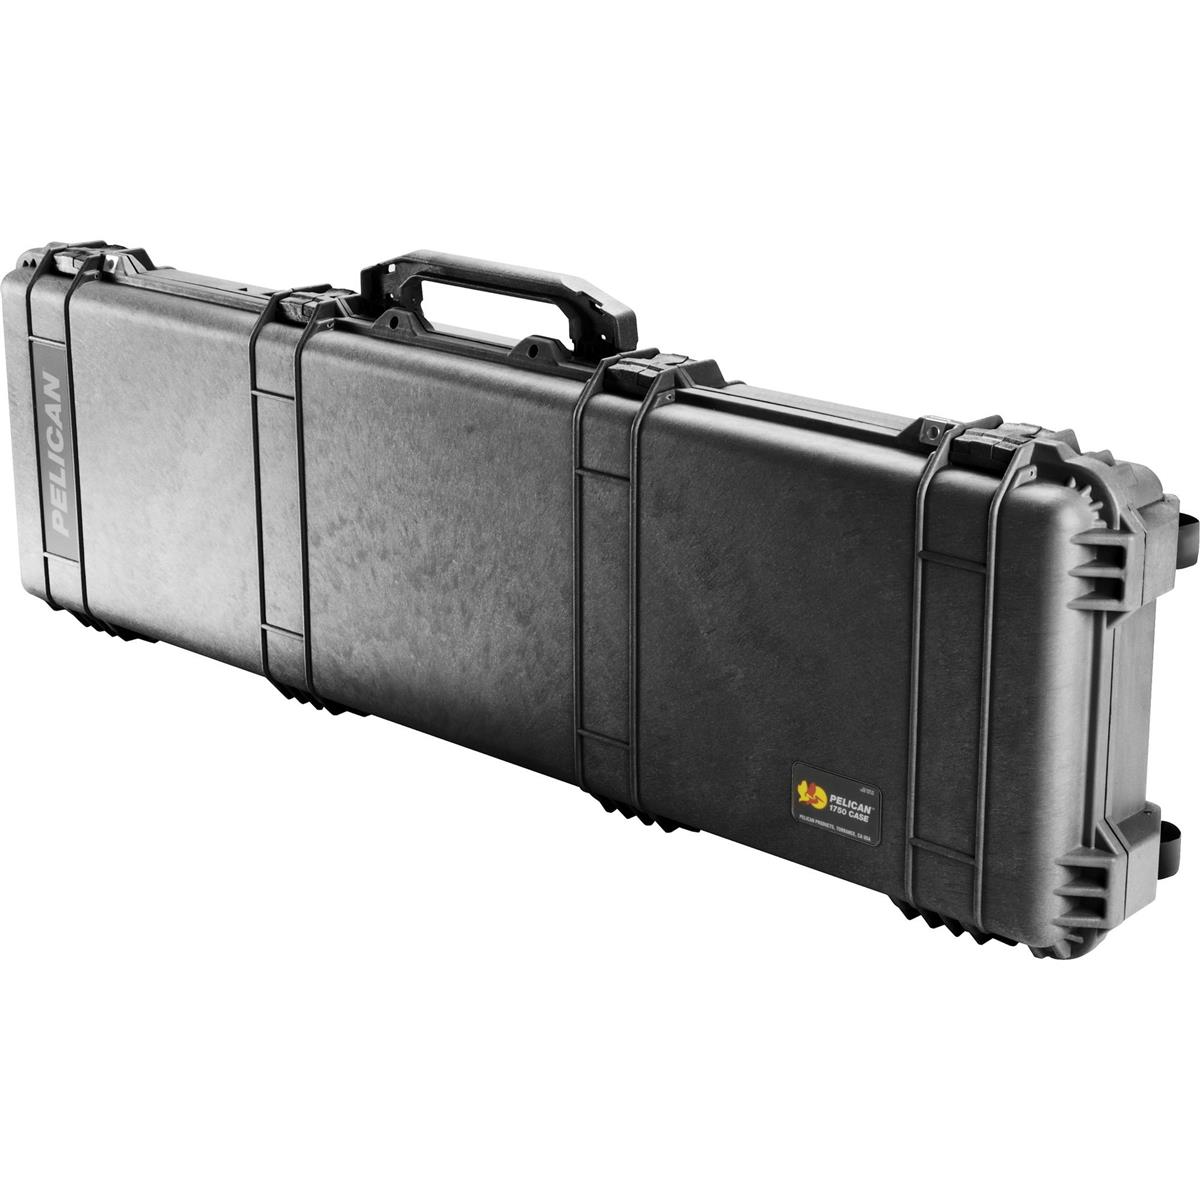 Image of Pelican 1750 Travel Vault Wheeled Weapons Case with Foam Insert